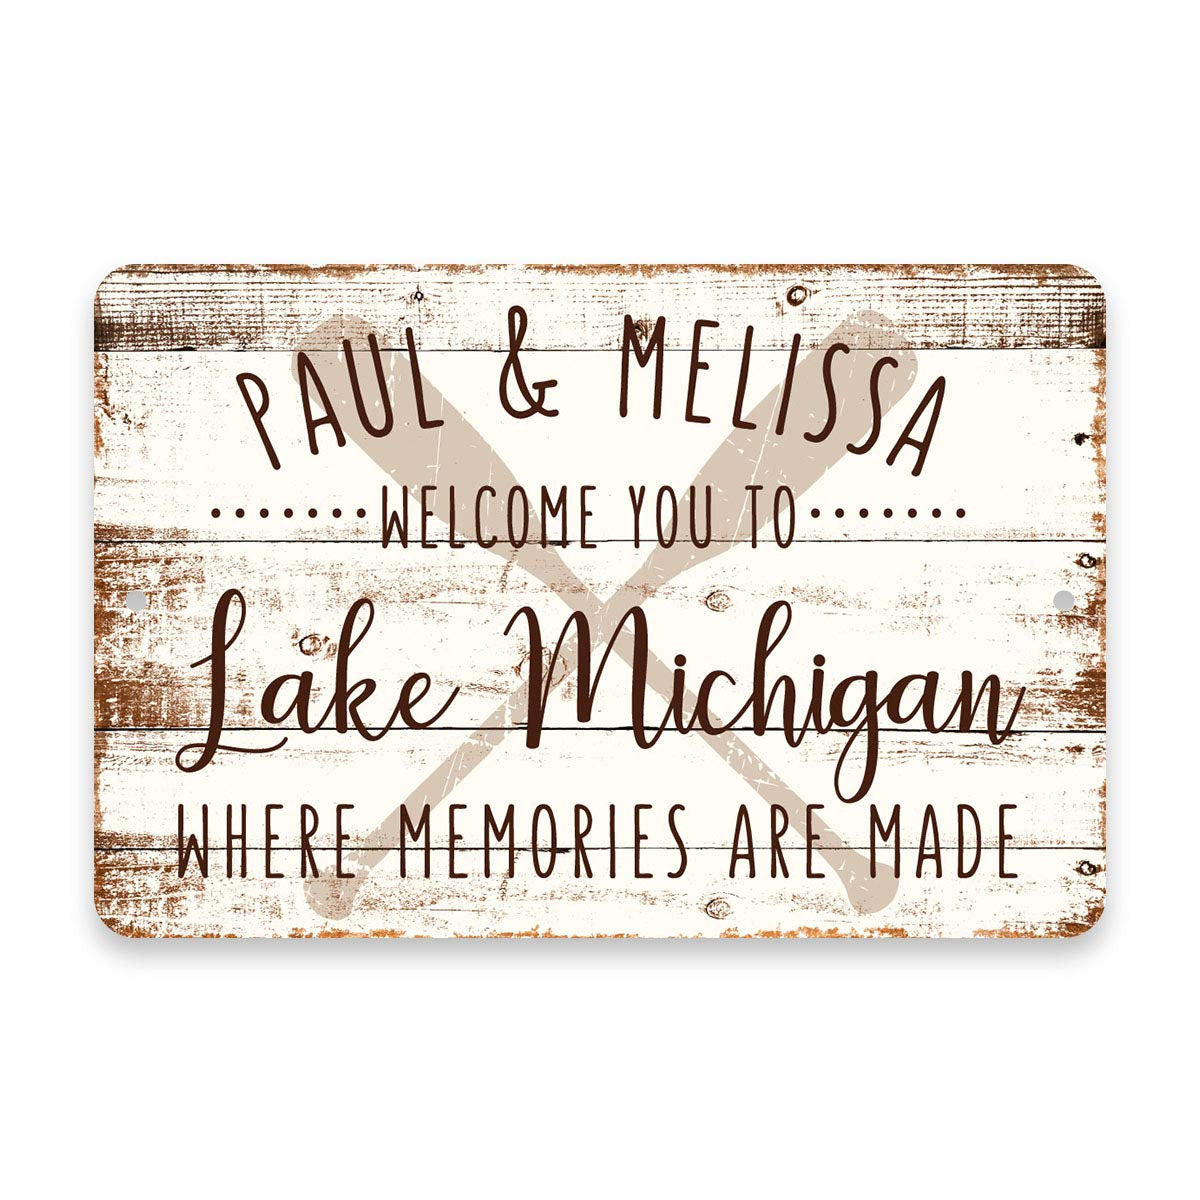 Personalized Welcome to Lake Michigan Where Memories are Made Sign - 8 X 12 Metal Sign with Wood Look